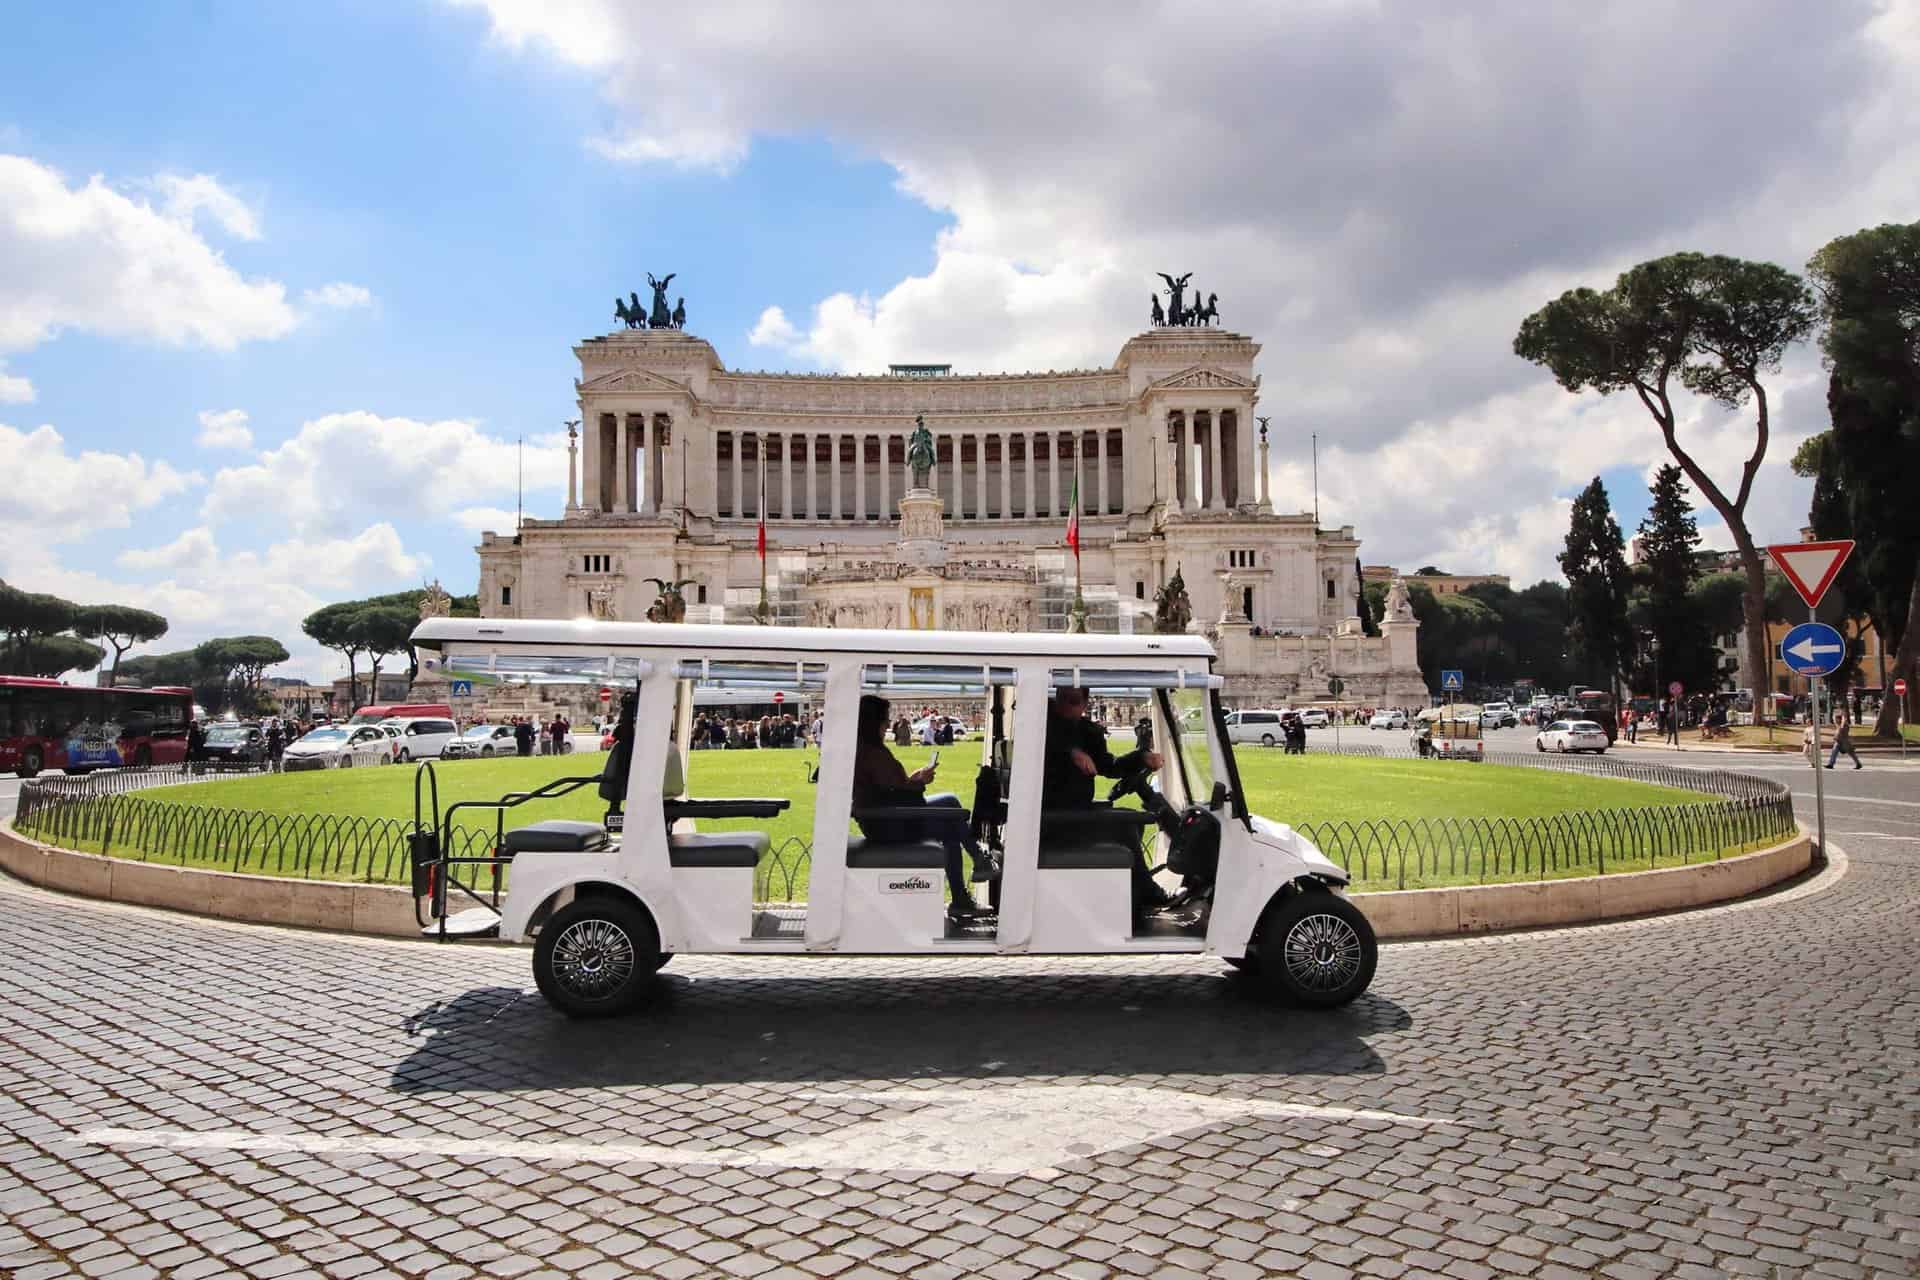 Rome in a day Golf cart tour with pickup from the cruise ship port Civitavecchia